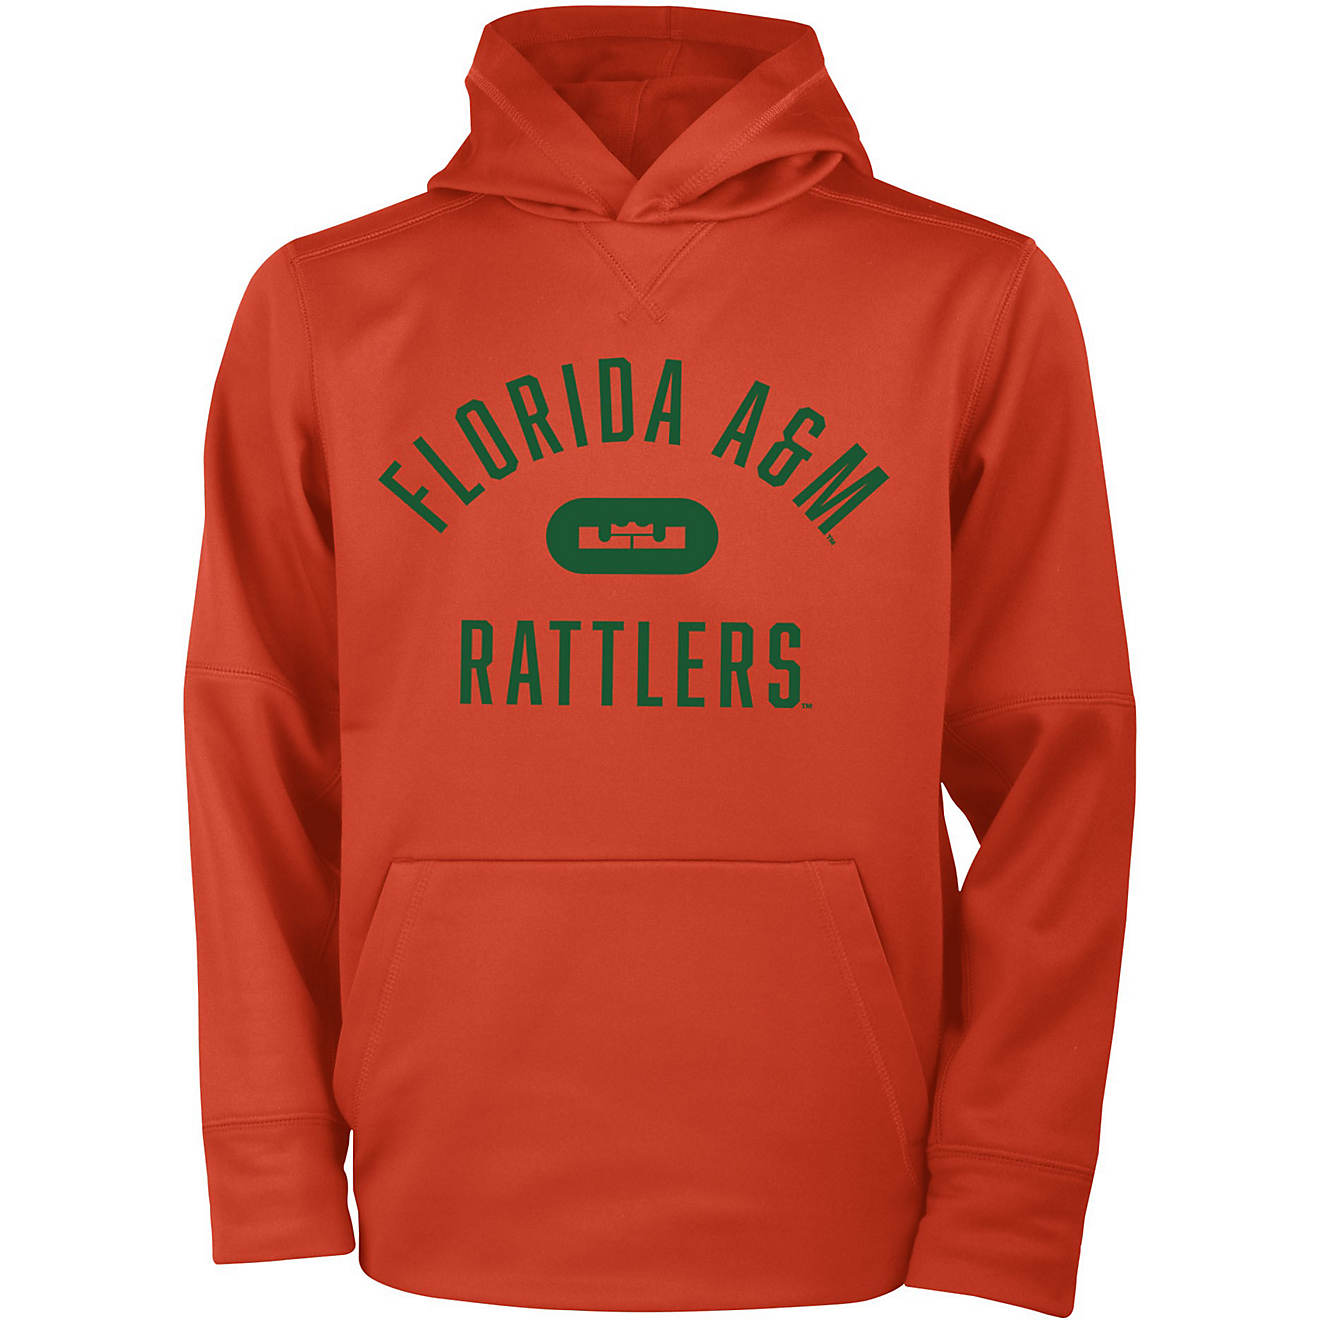 Nike Youth Florida A&M University LBJ Therma Pullover Hoodie                                                                     - view number 1